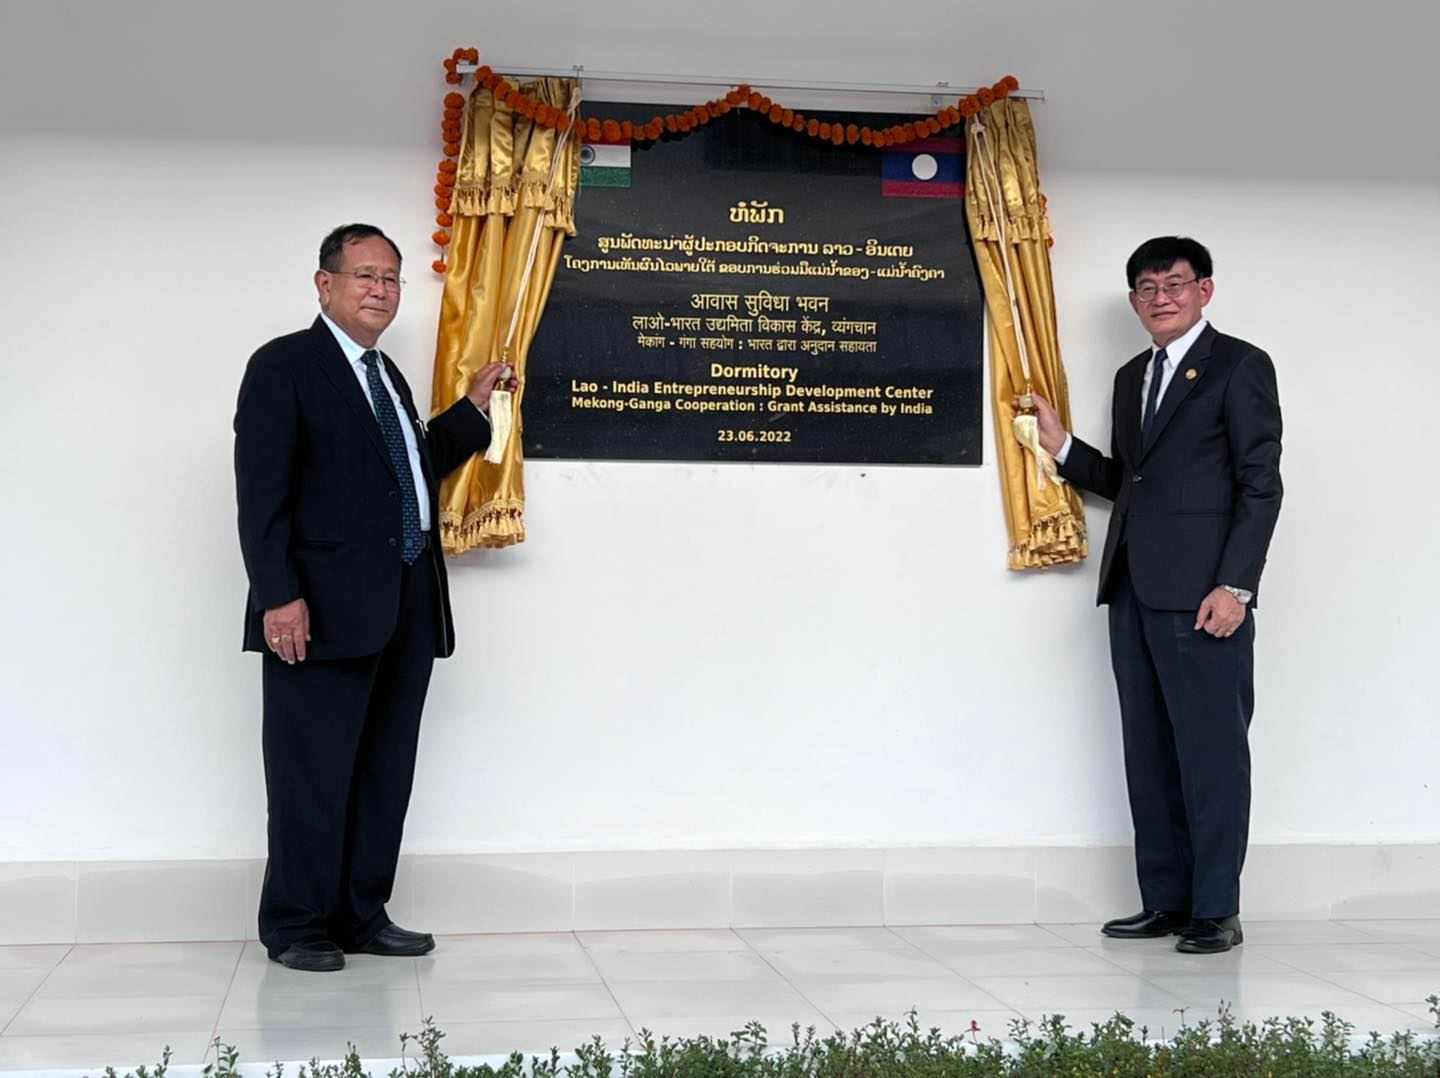 Hon'ble MoS Dr. Rajkumar Ranjan Singh inaugurated the Lao-India Entrepreneurship Development Centre Dormitory Project in presence of H.E. Minister of Education & Sports,  Lao PDR, Dr Phouth Simmalavong